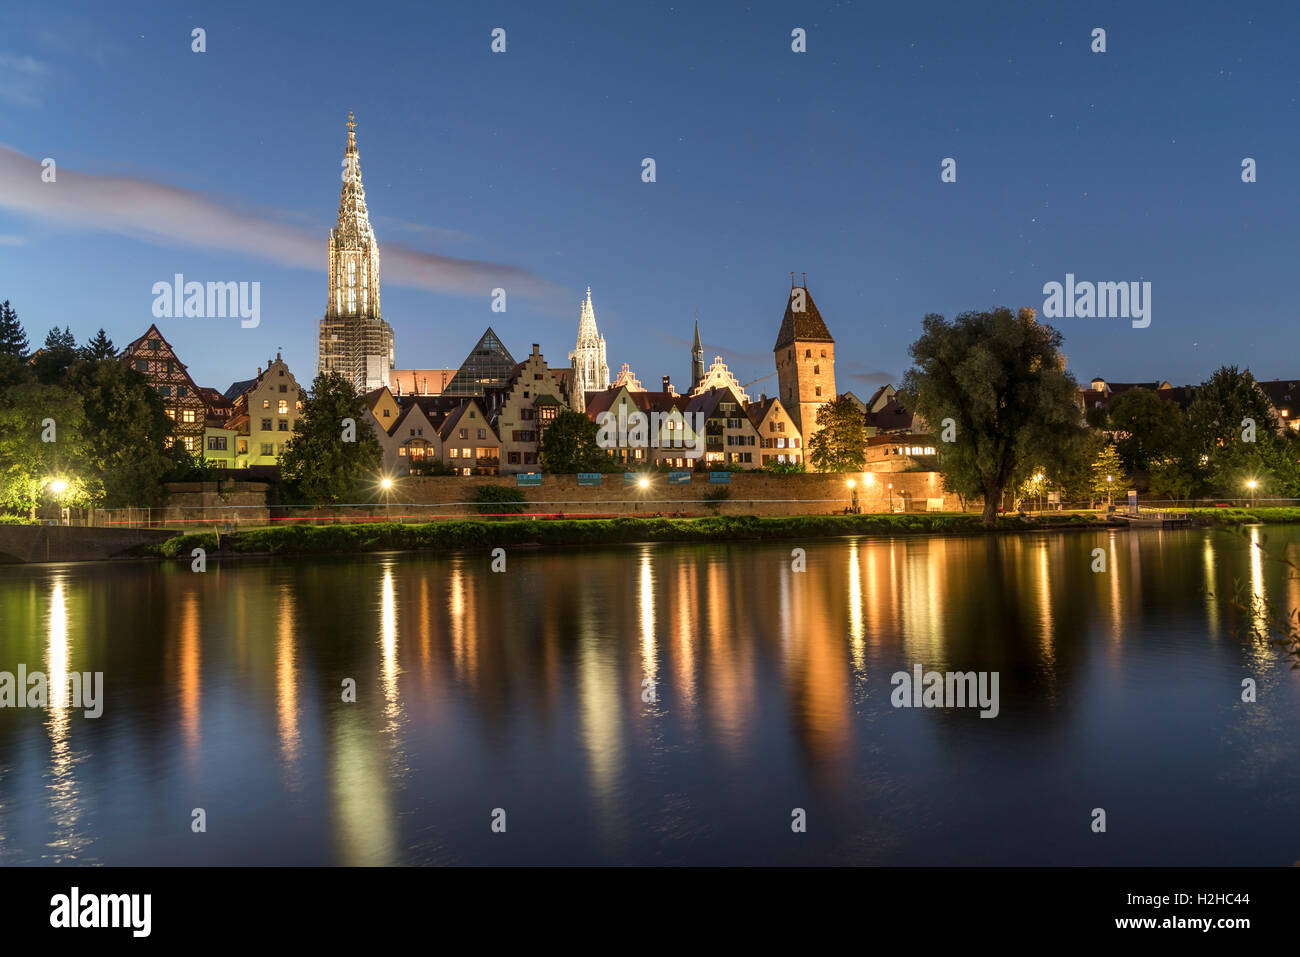 cityscape with danube river and the Ulm Minster at dusk, Ulm, Baden-Württemberg, Germany, Europe Stock Photo